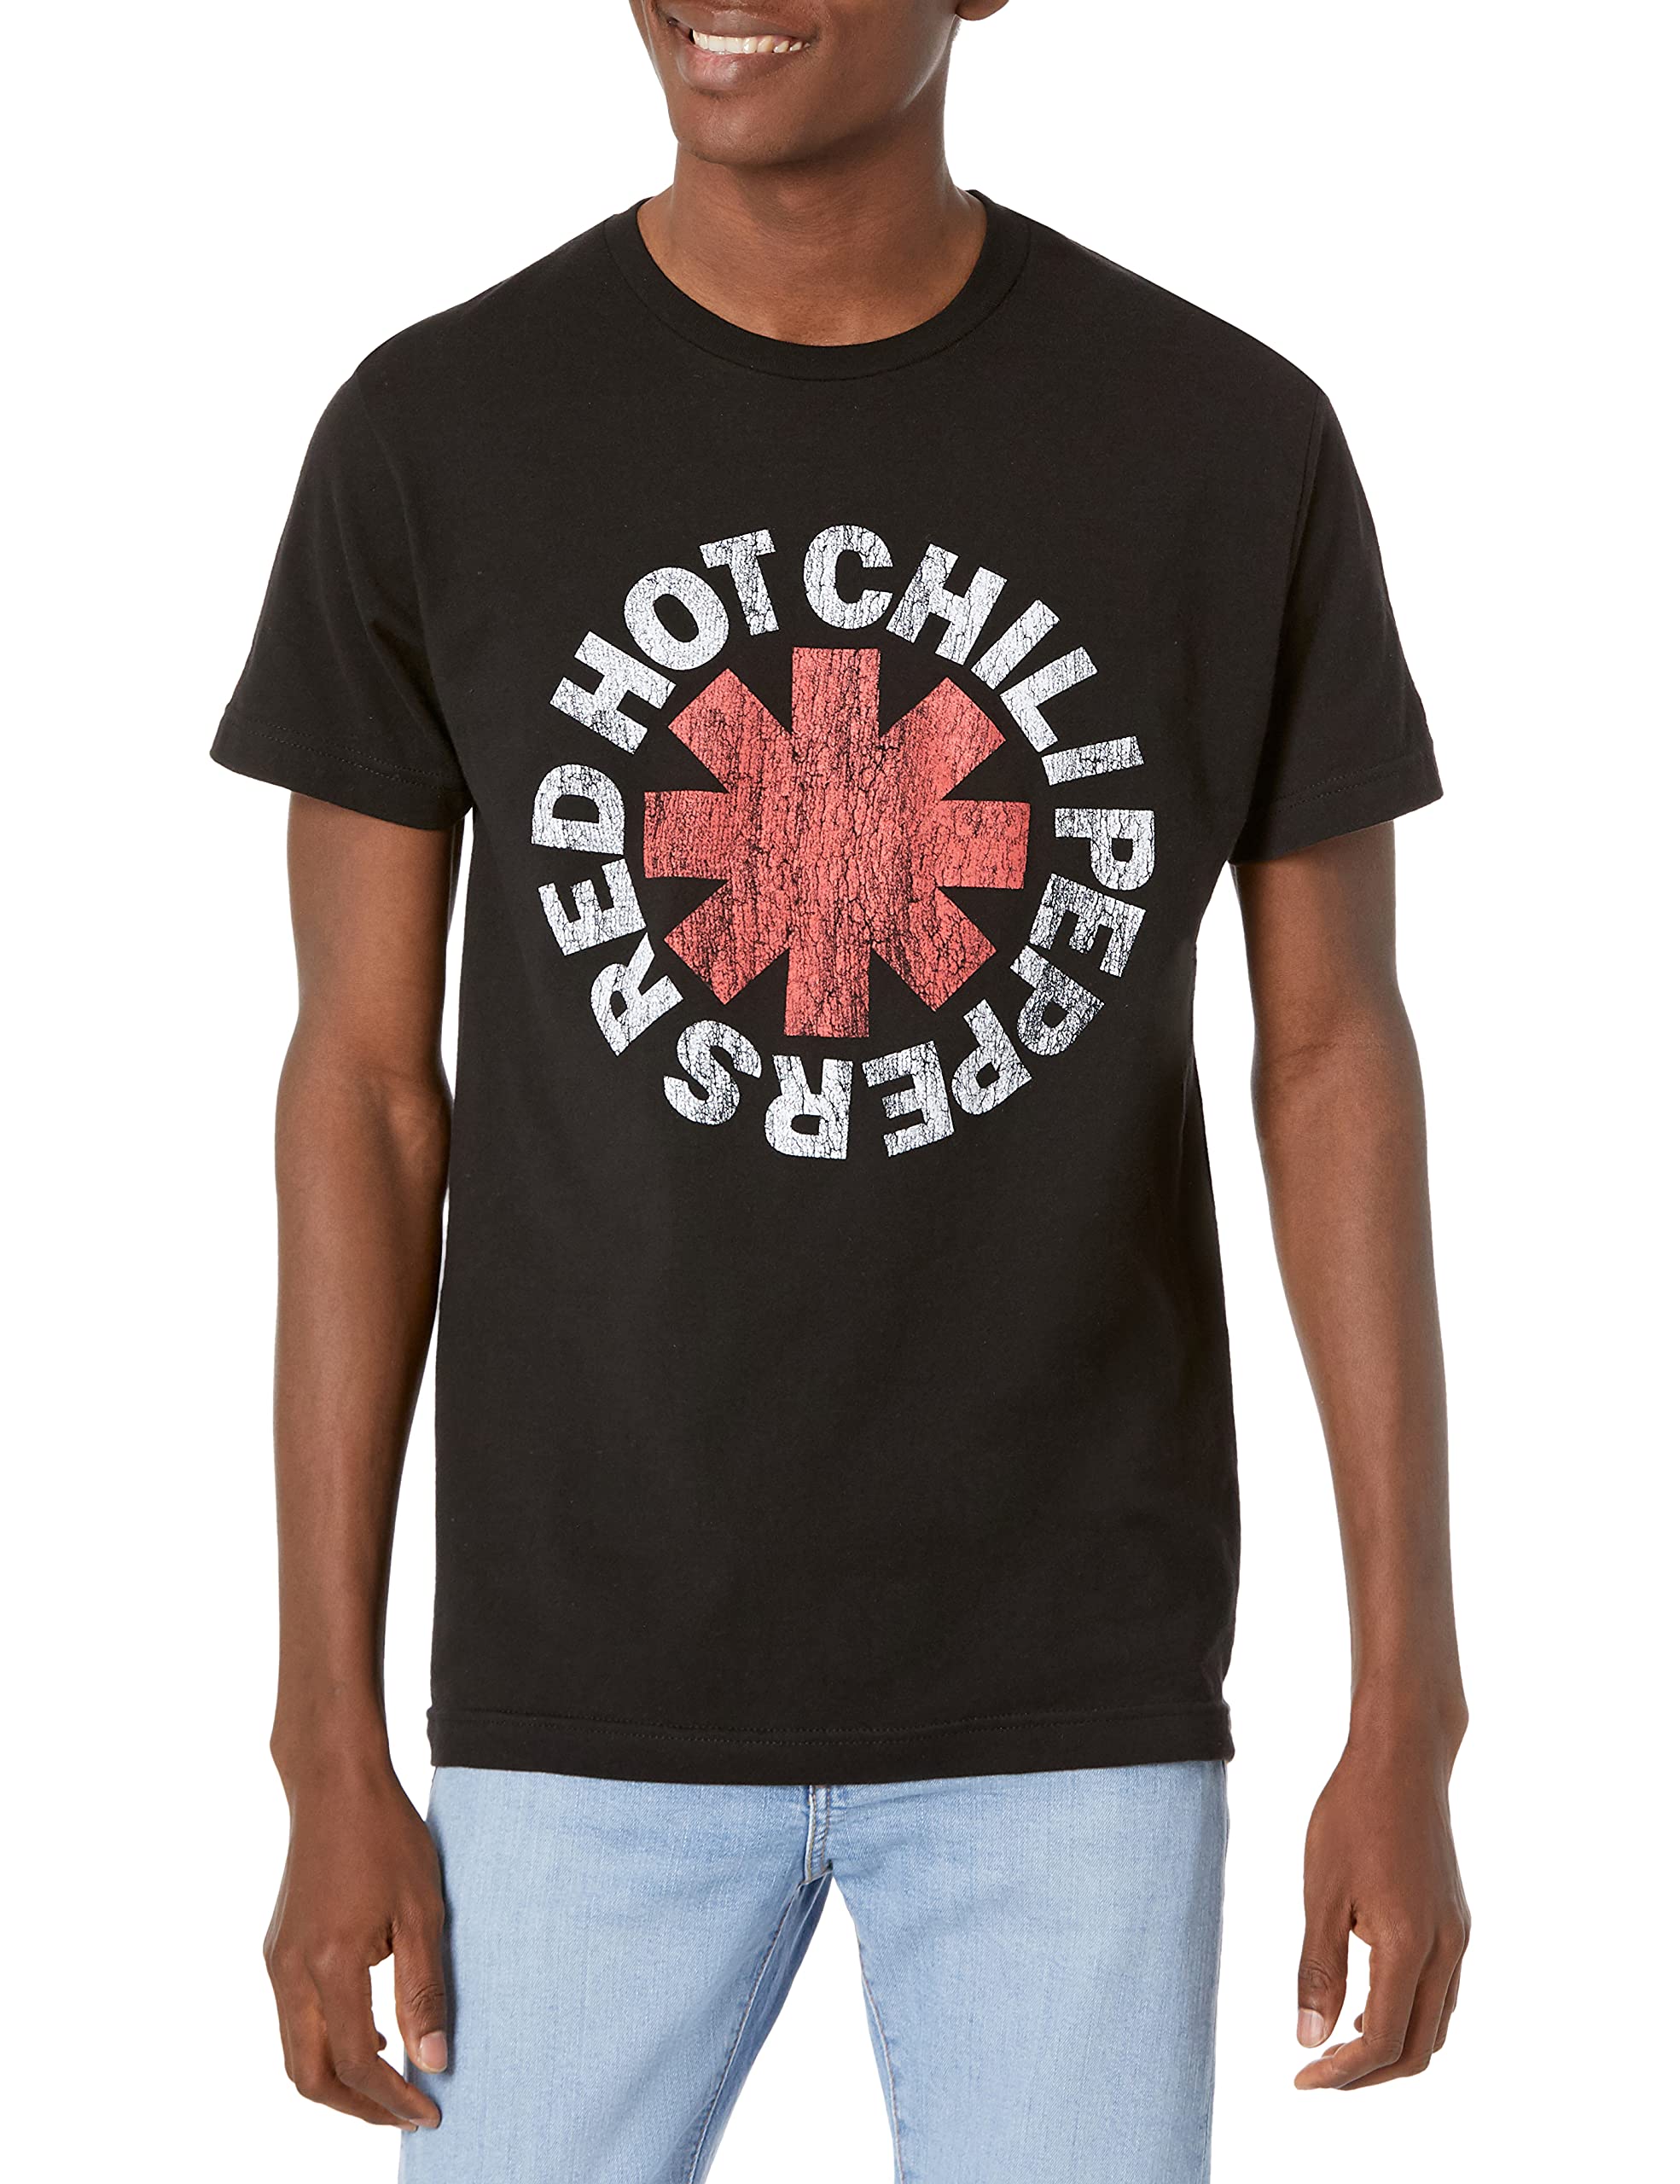 Red Hot Chili Peppers Men's Classic Asterisk T-Shirt